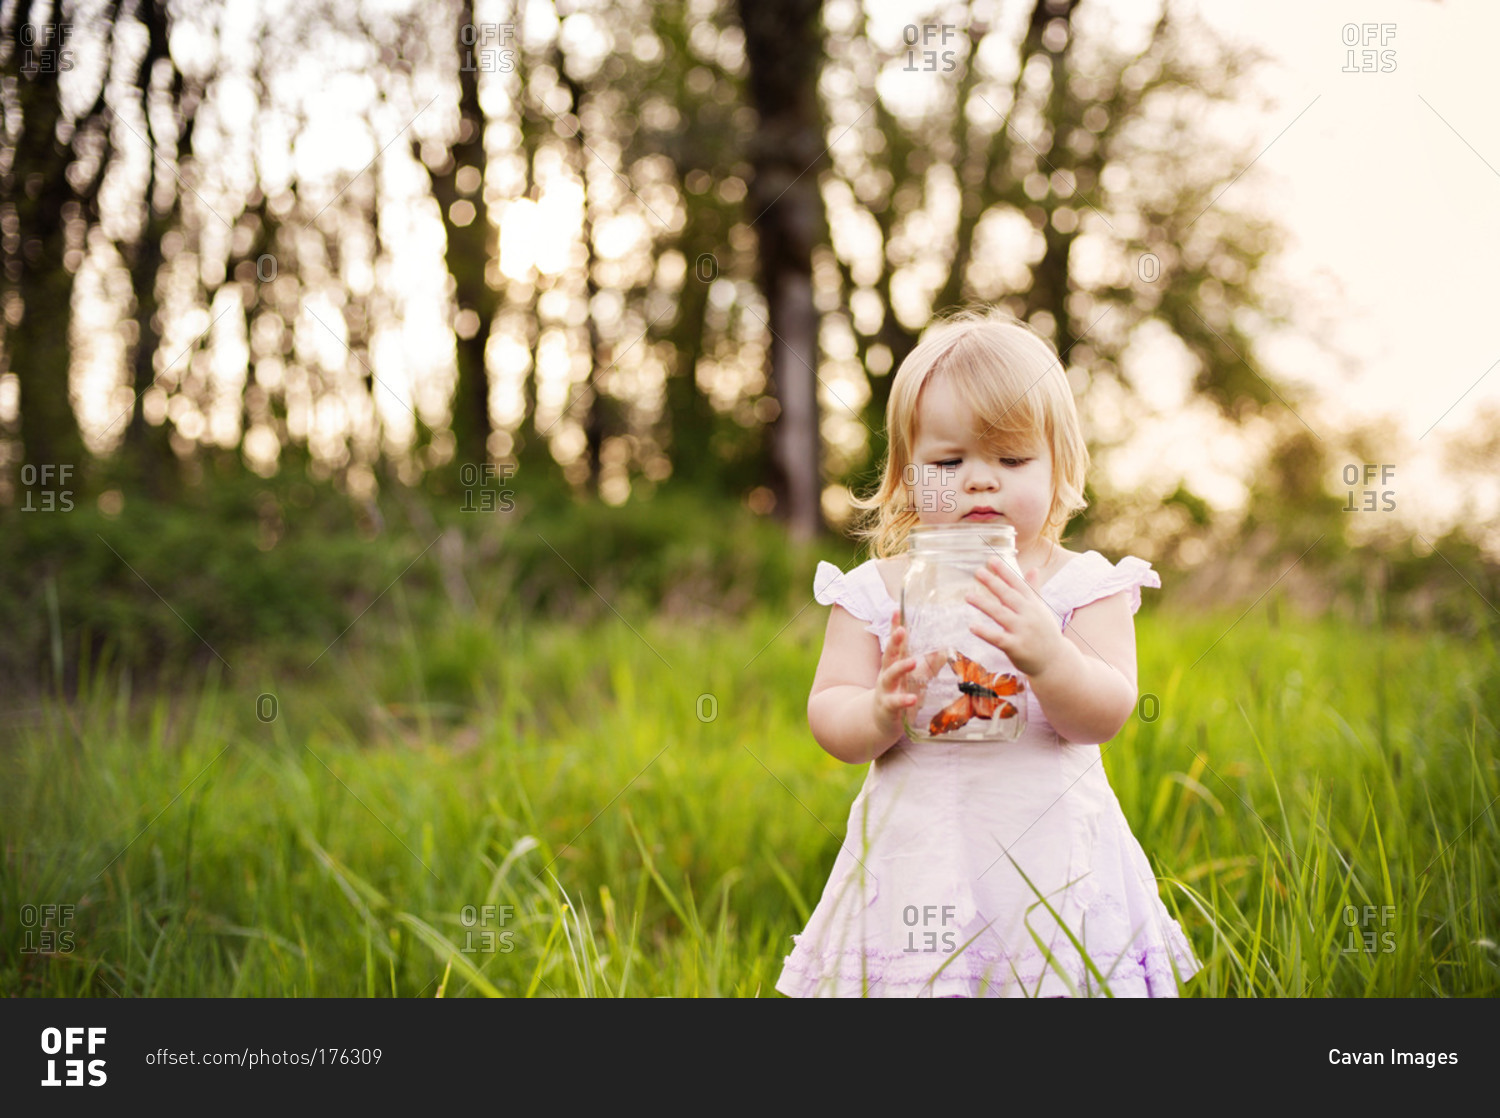 A little girl holds a butterfly in a jar